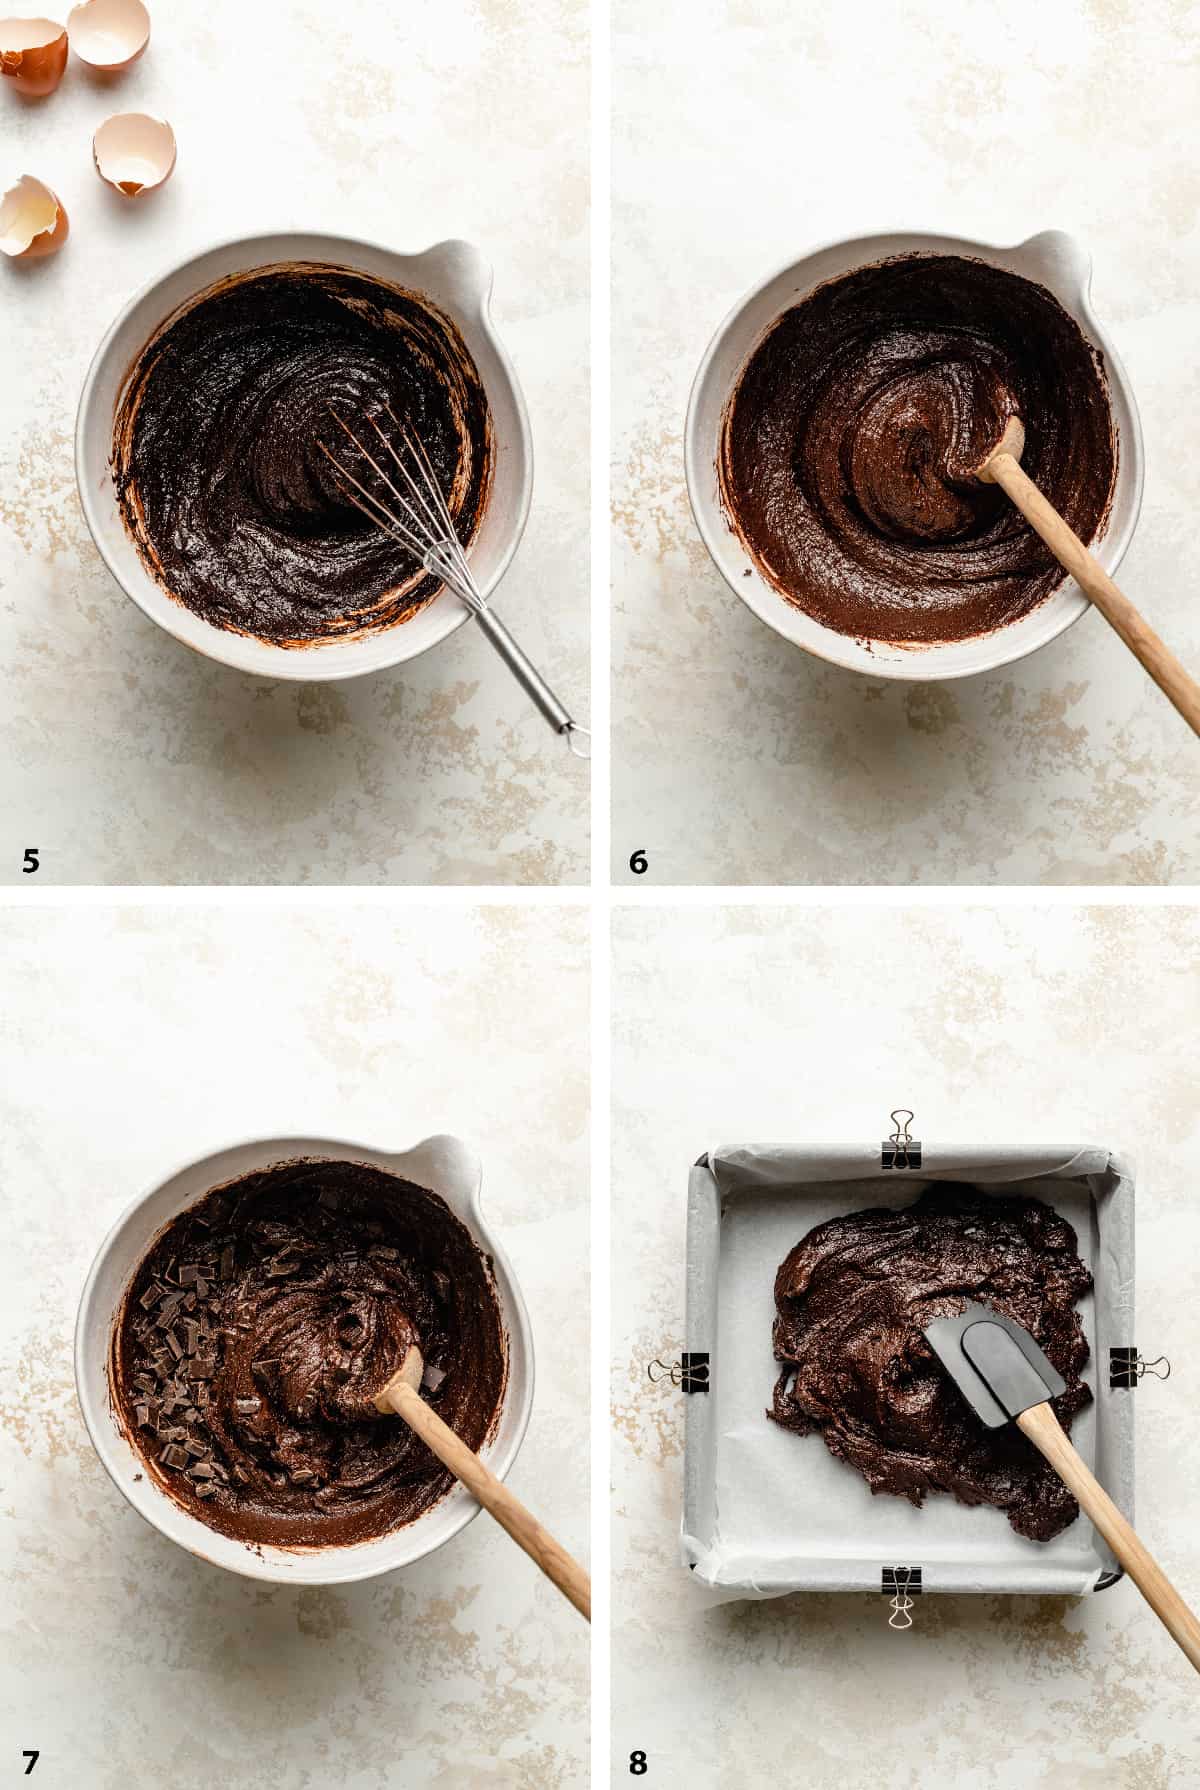 Process steps of finishing off the chocolate brownie batter adding in chopped chocolate and spreading in a baking tin.